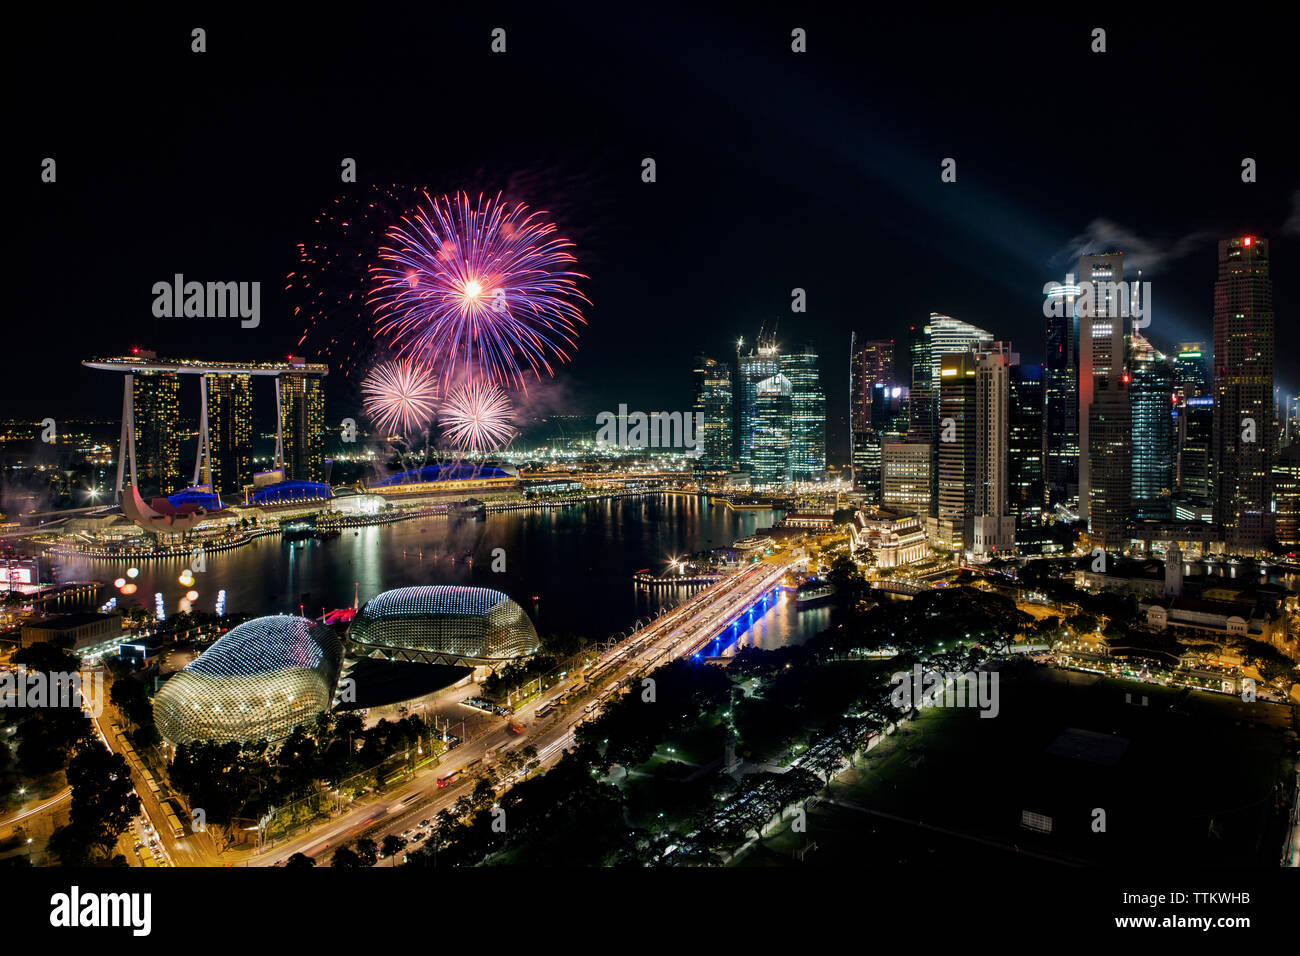 Illuminated cityscape and fireworks against sky at night Stock Photo